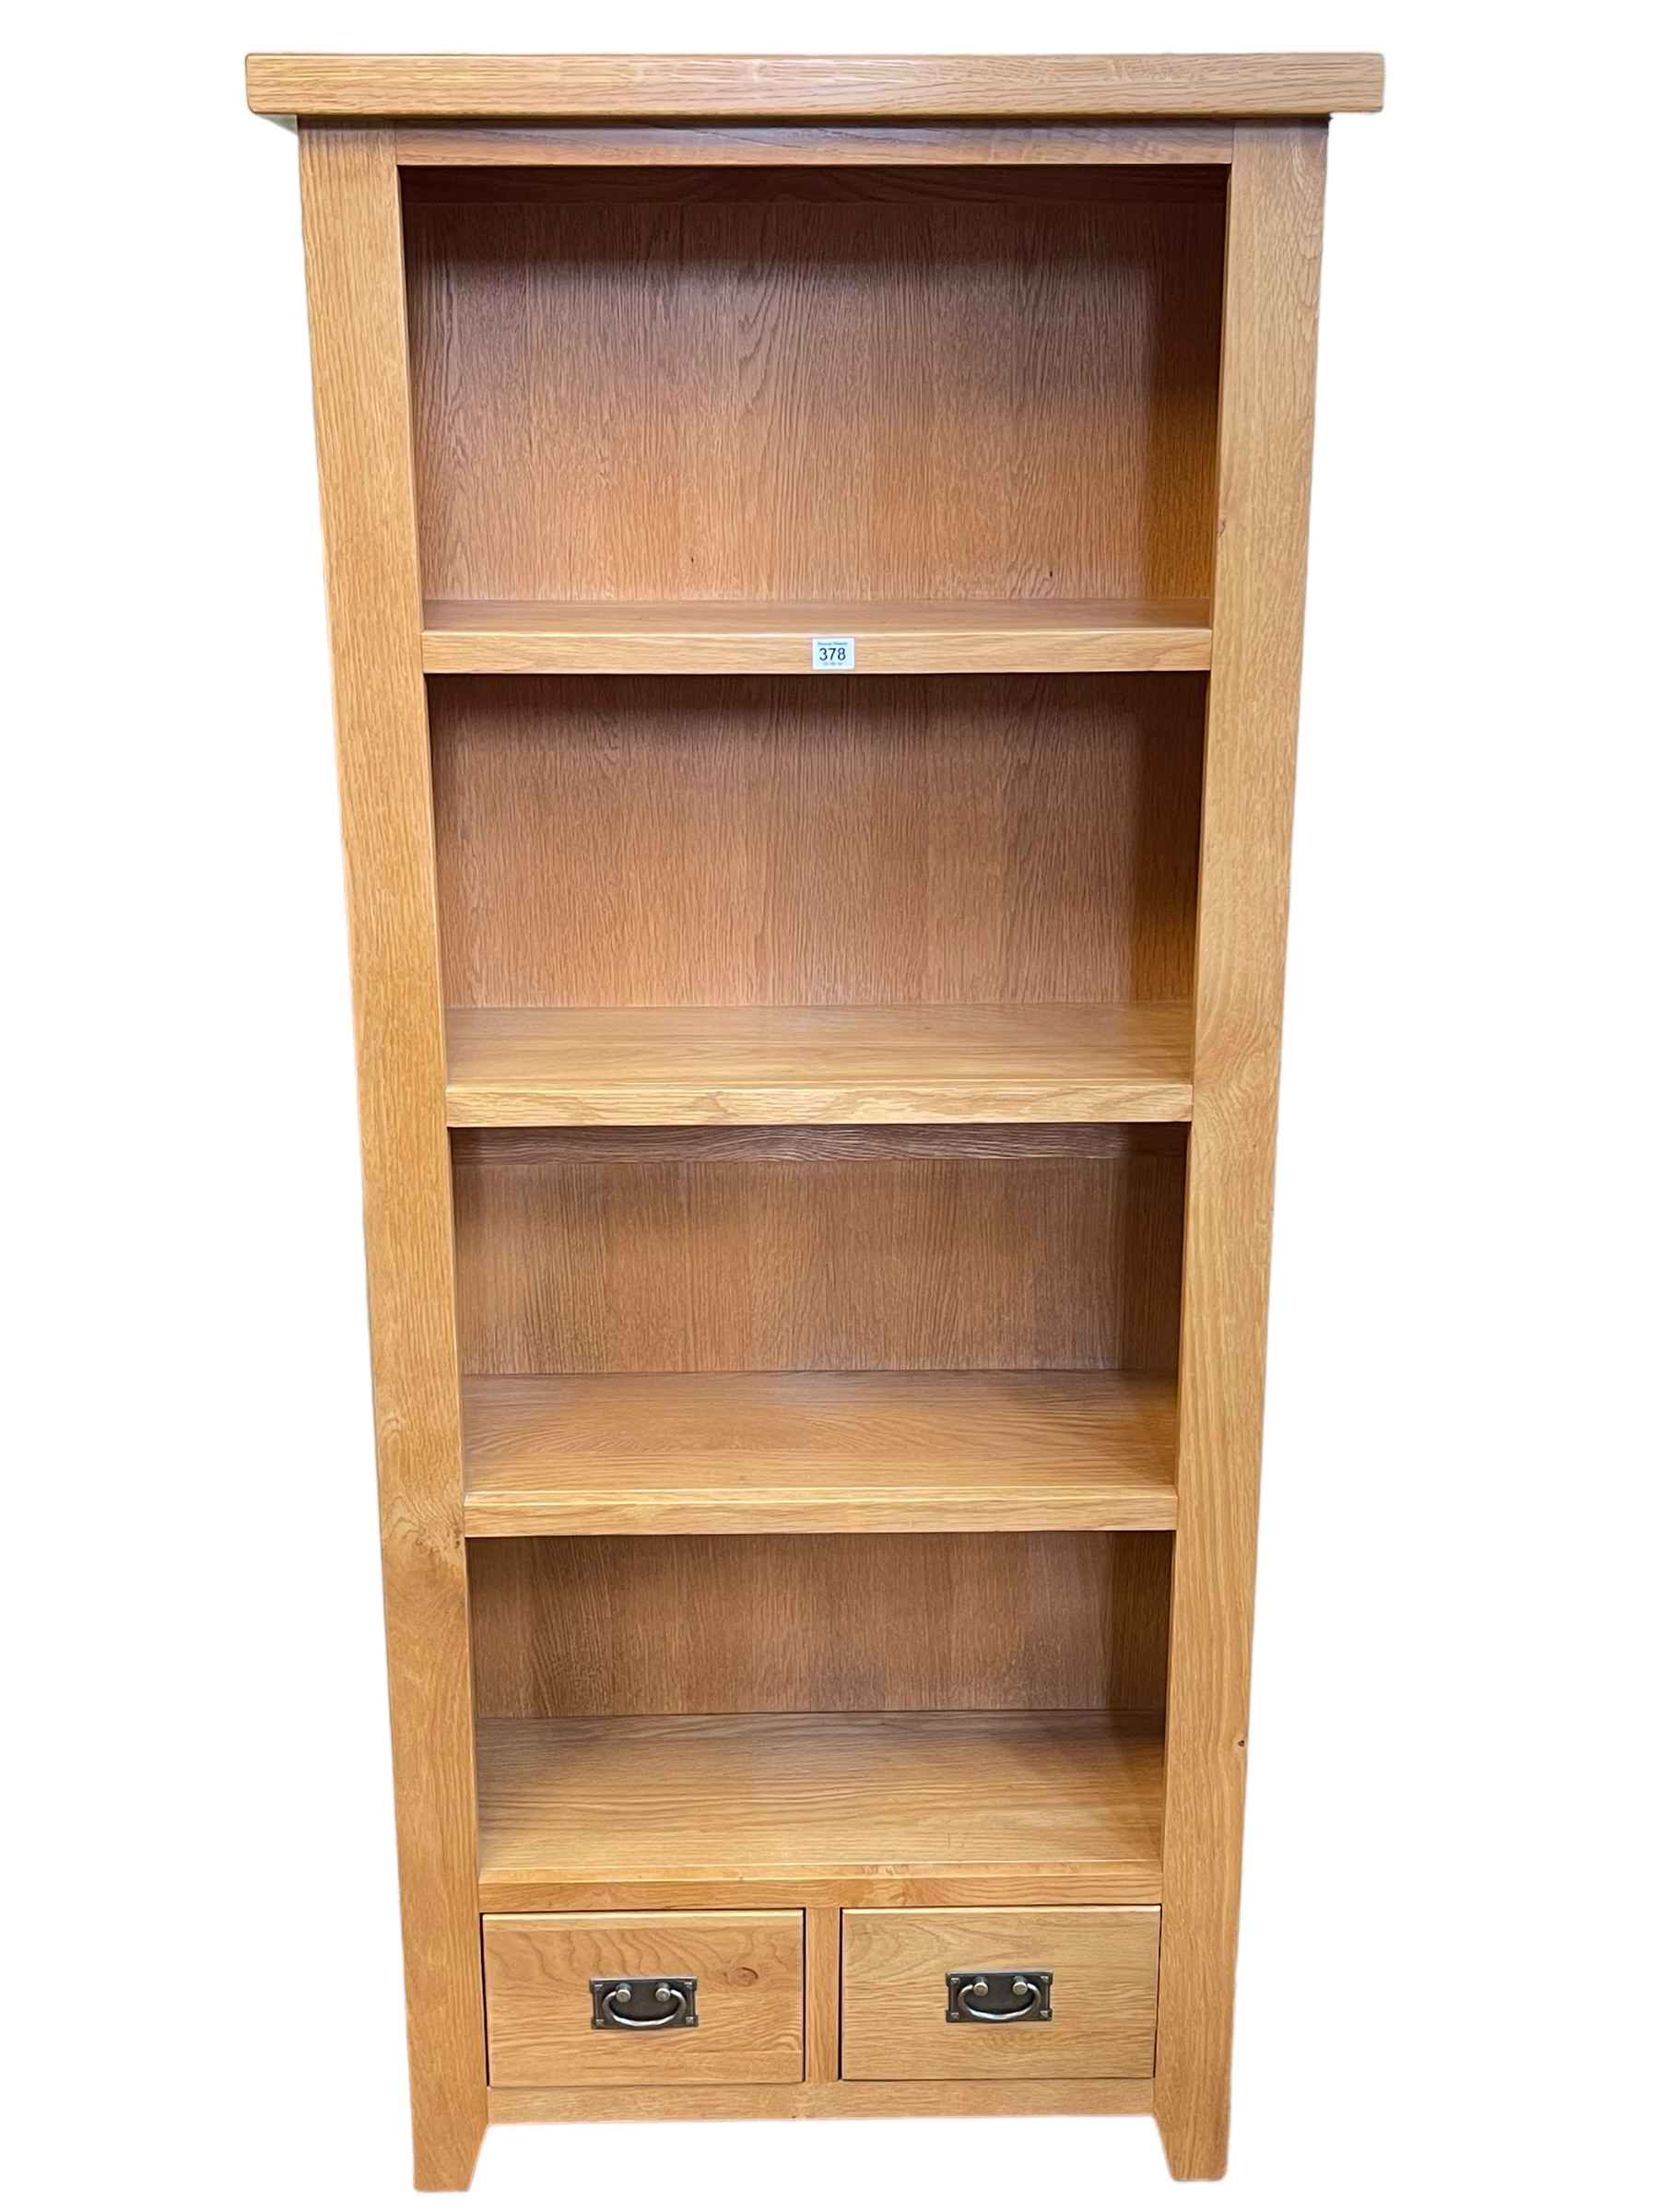 Contemporary light oak open bookcase with two base drawers, 181cm by 80cm by 32.5cm.